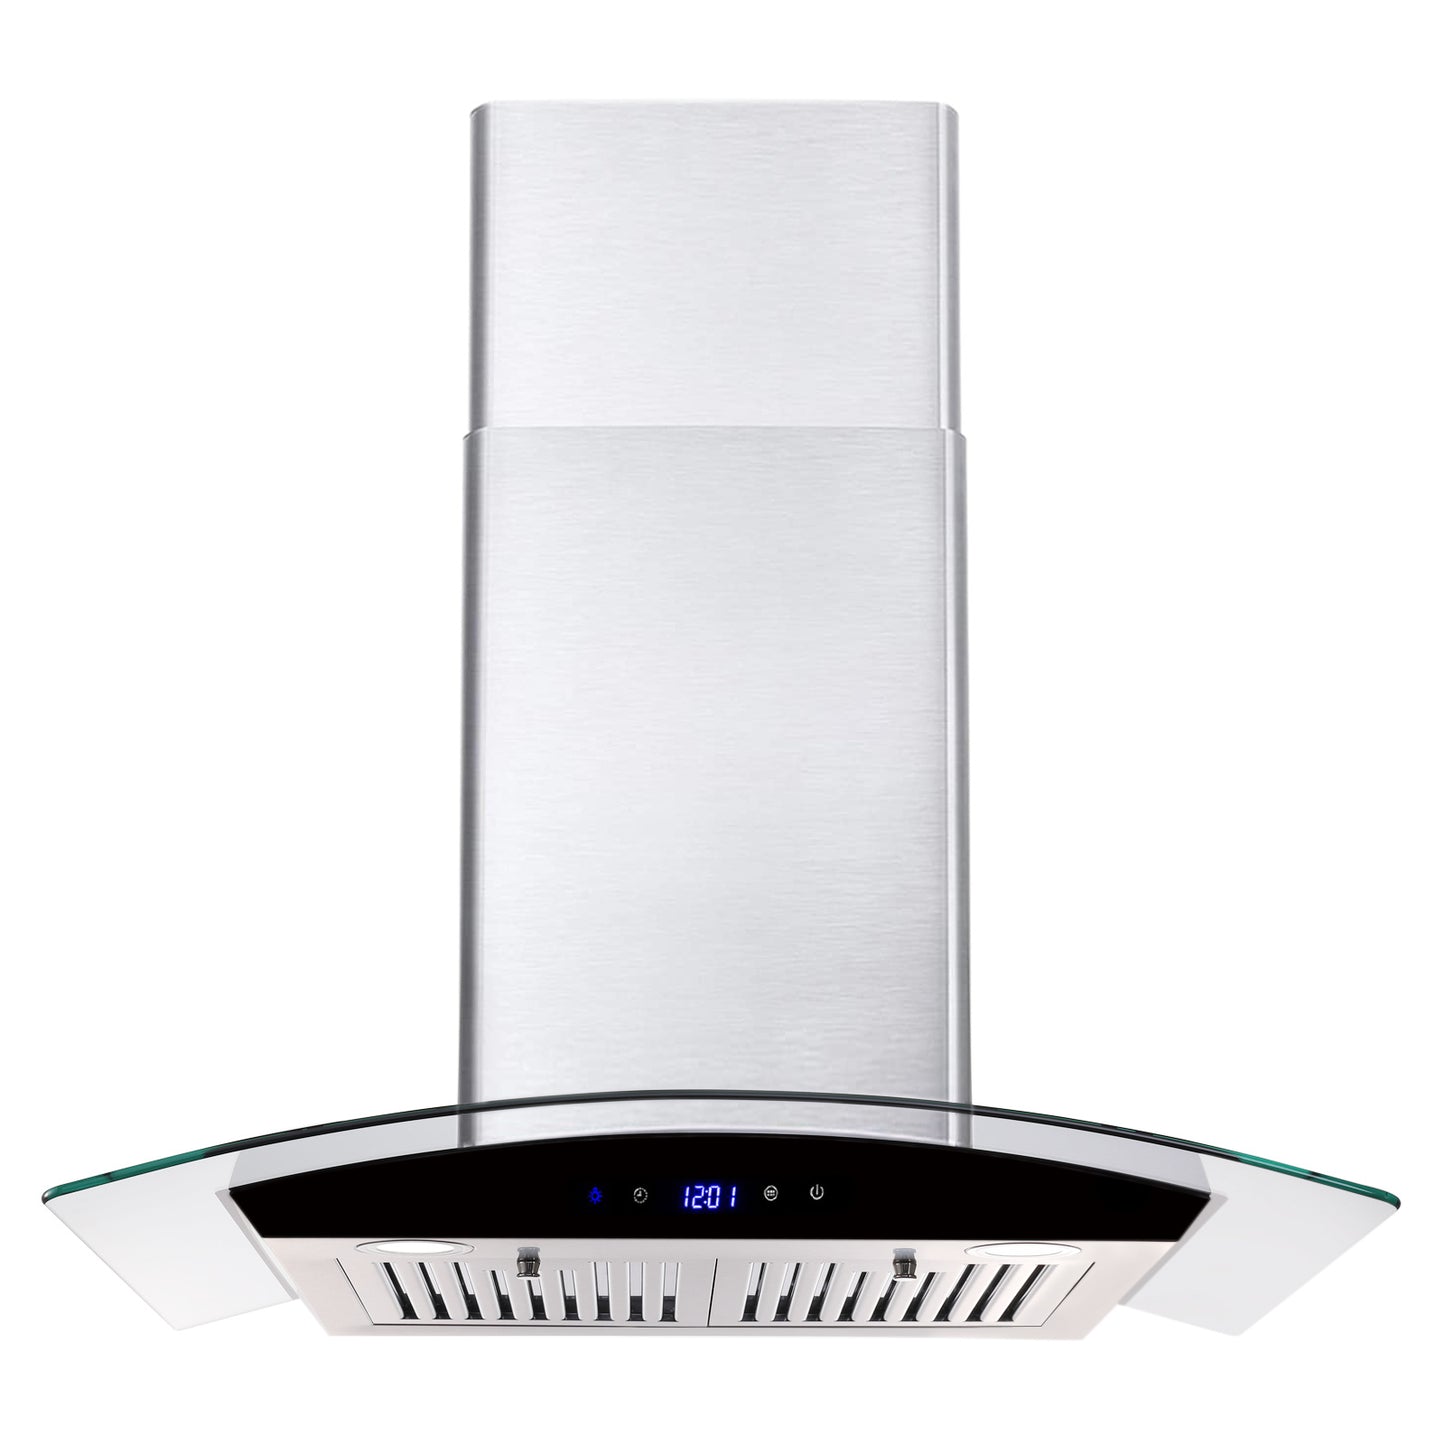 30 inch Wall Mounted Range Hood 700CFM Tempered Glass Touch Panel Control Vented LEDs